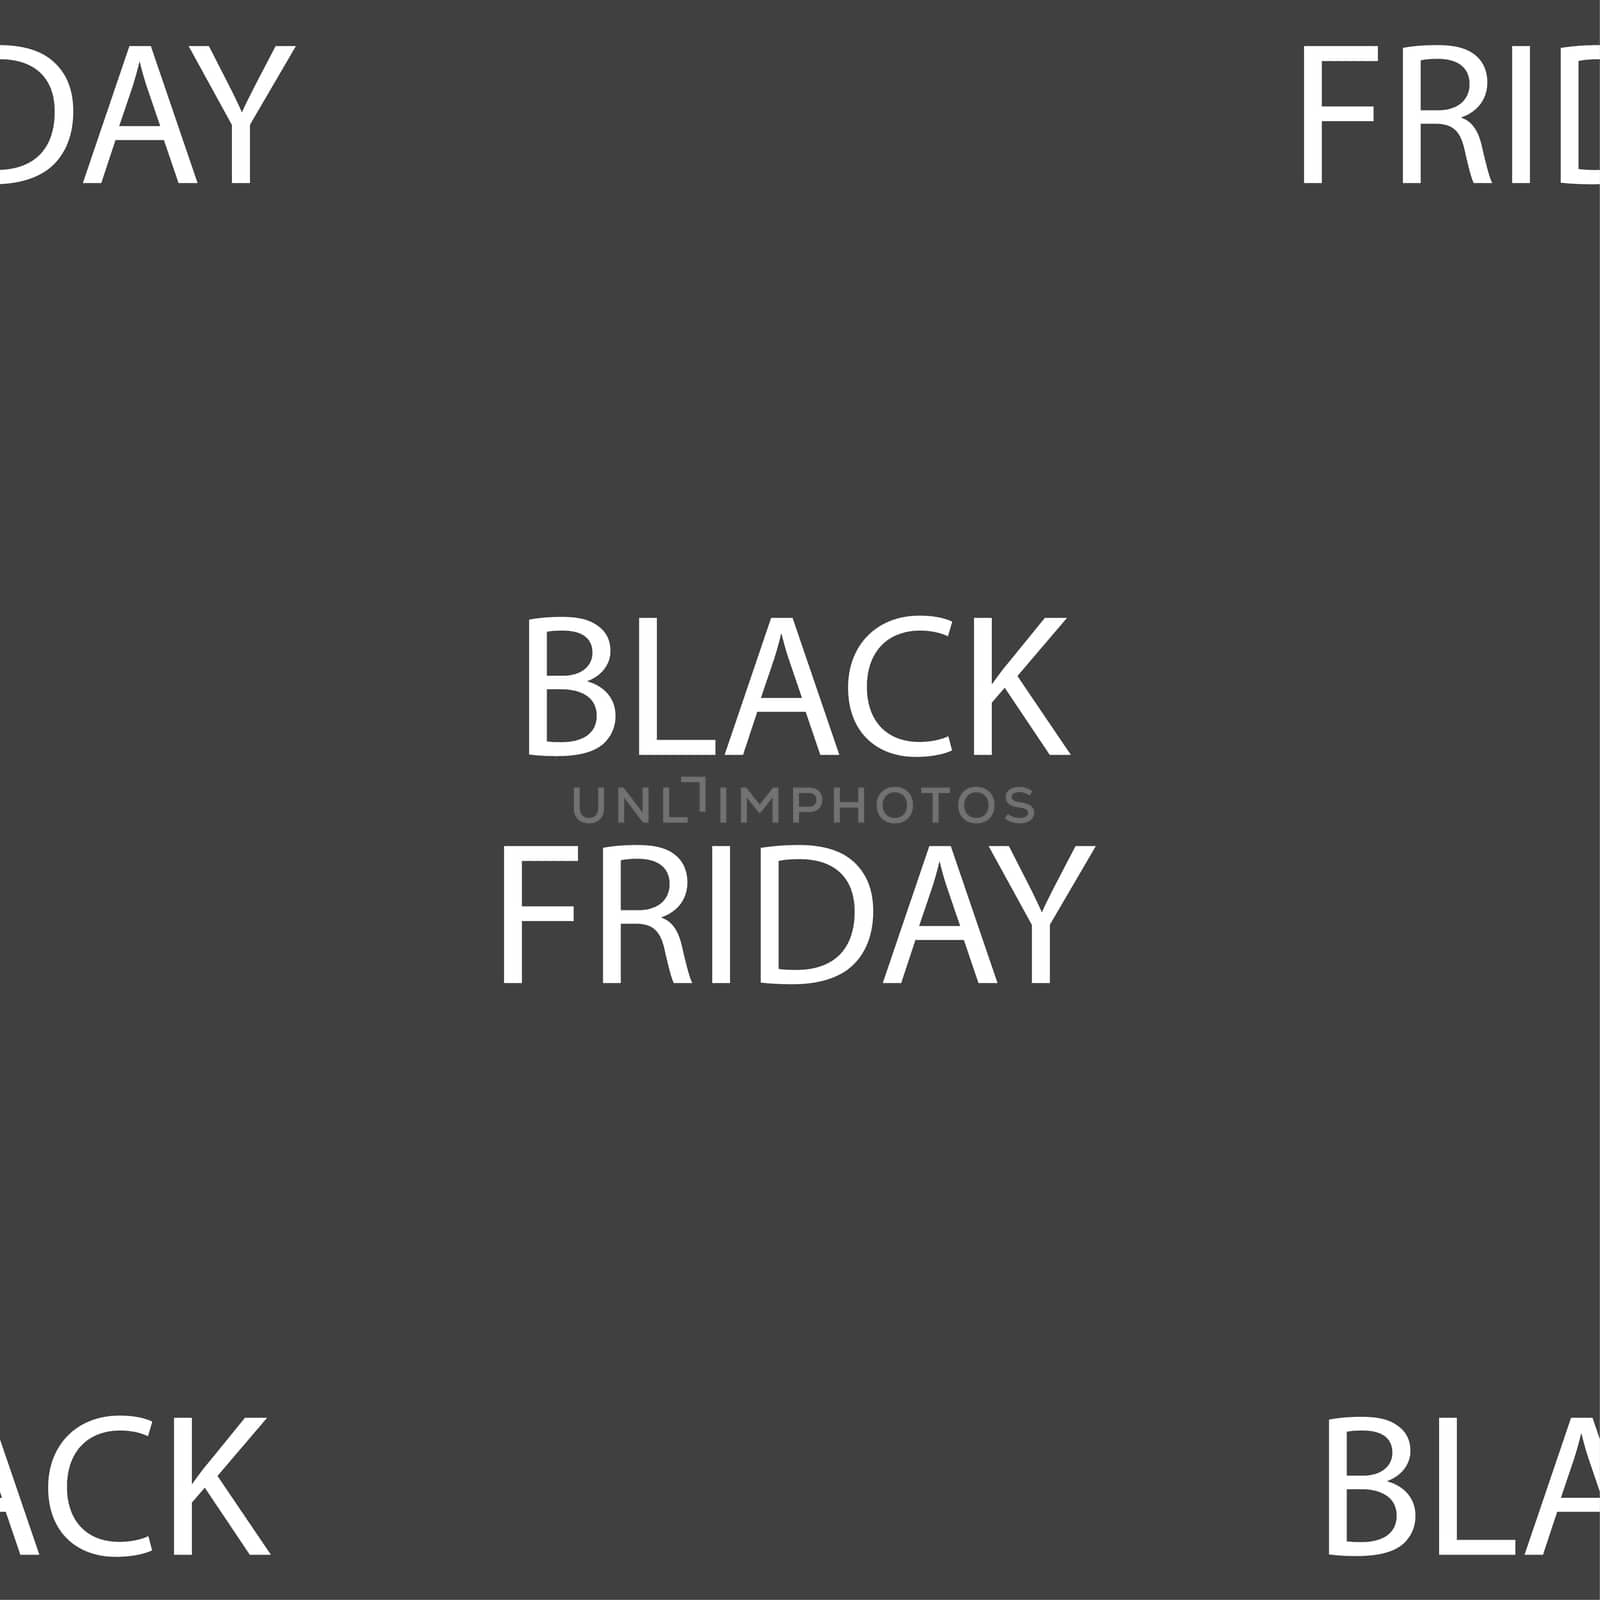 Black friday sign icon. Sale symbol.Special offer label. Seamless pattern on a gray background. illustration